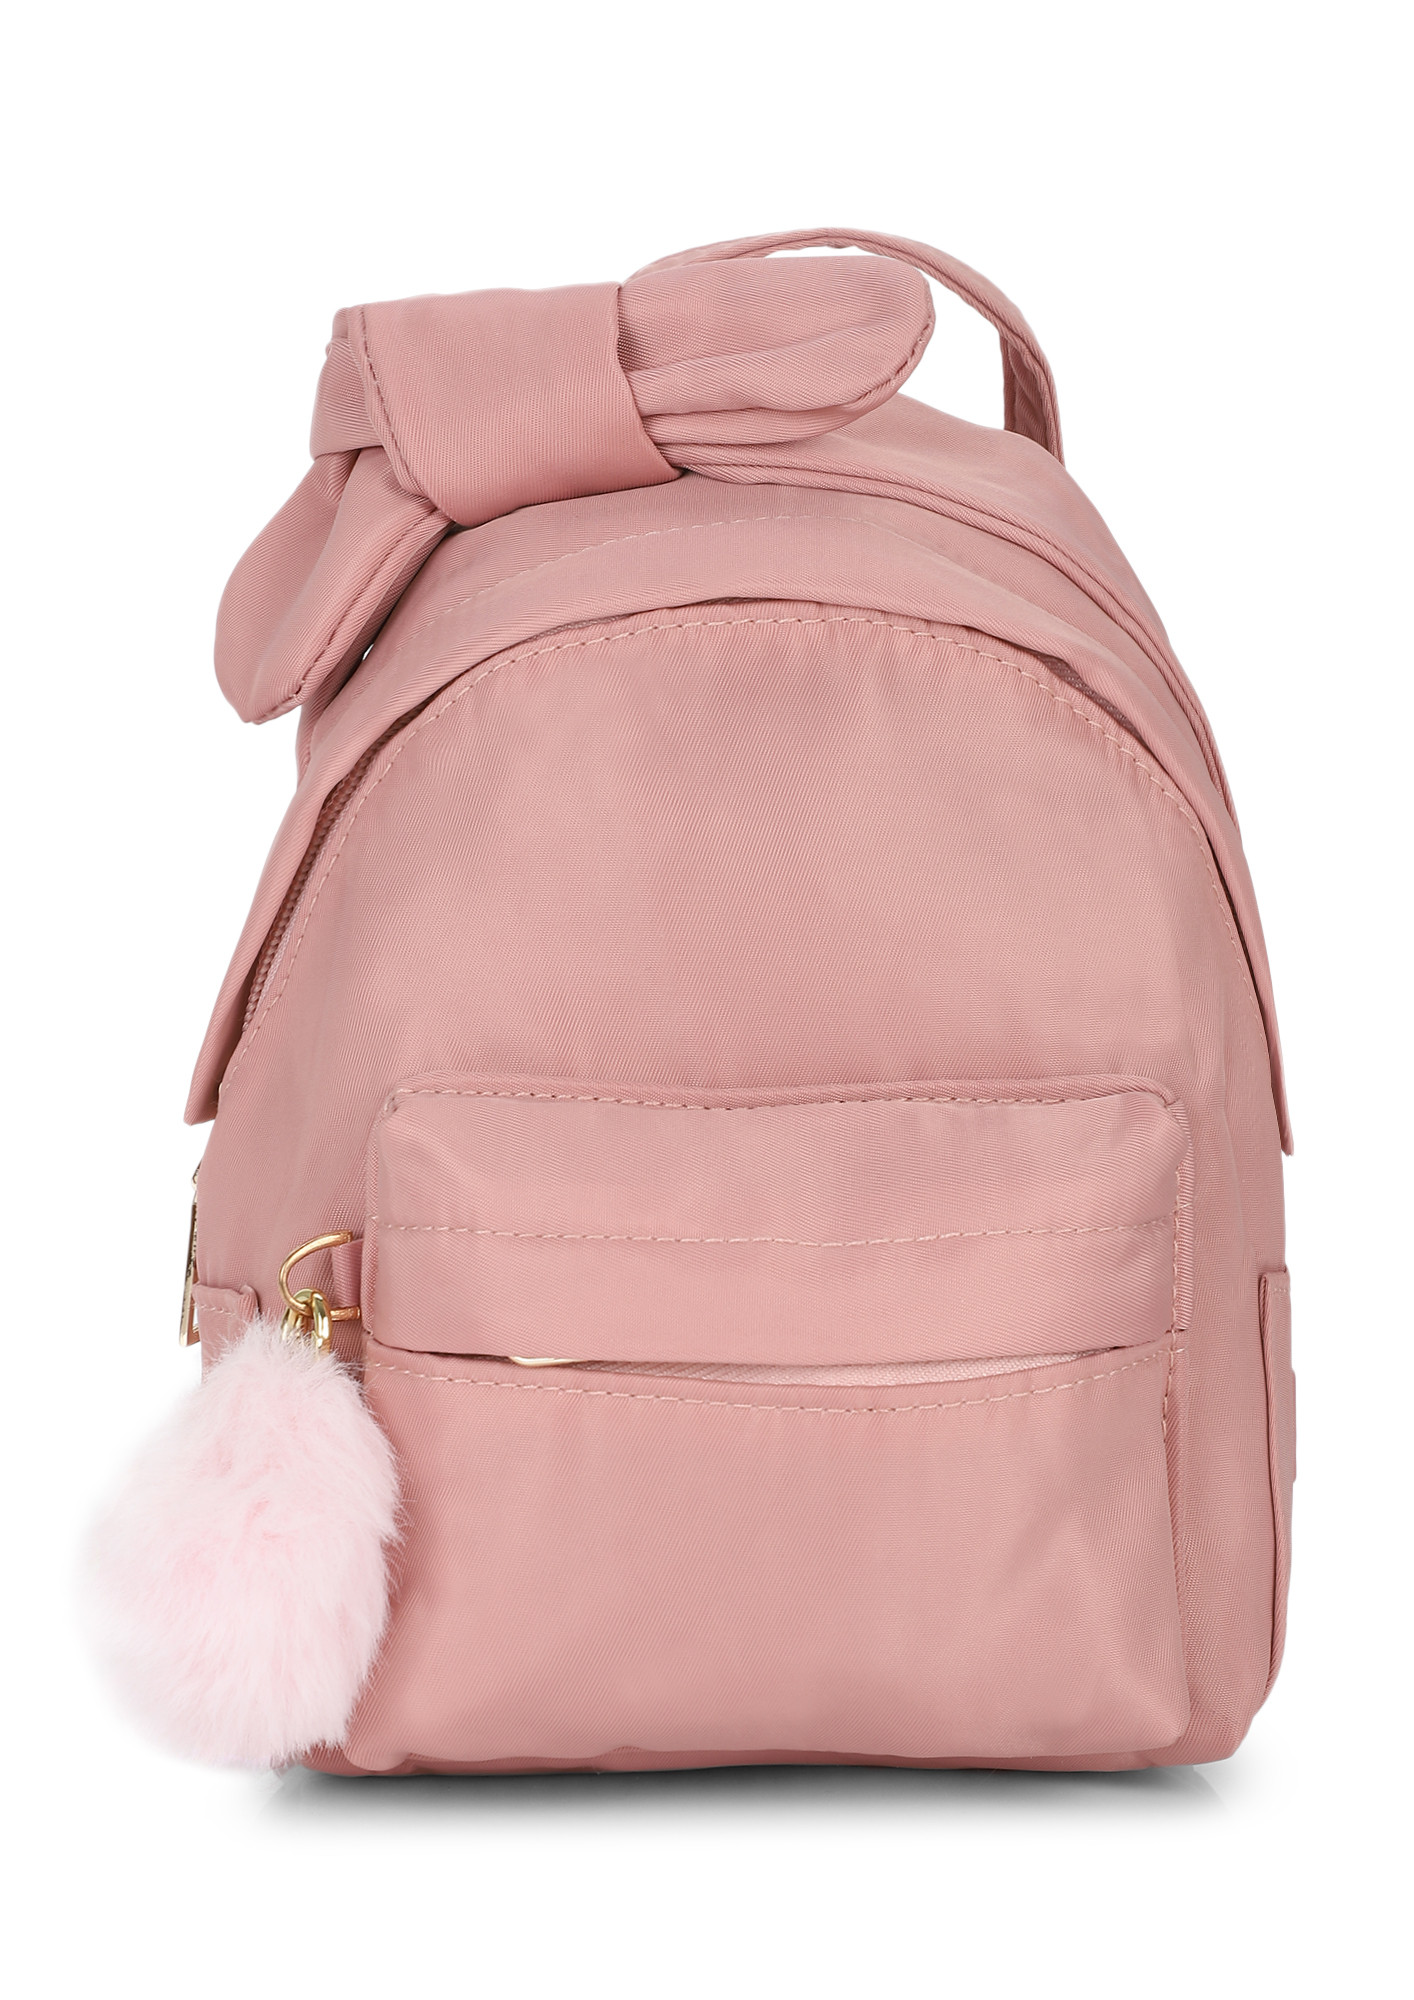 Let's Vacay Now Pink Backpack